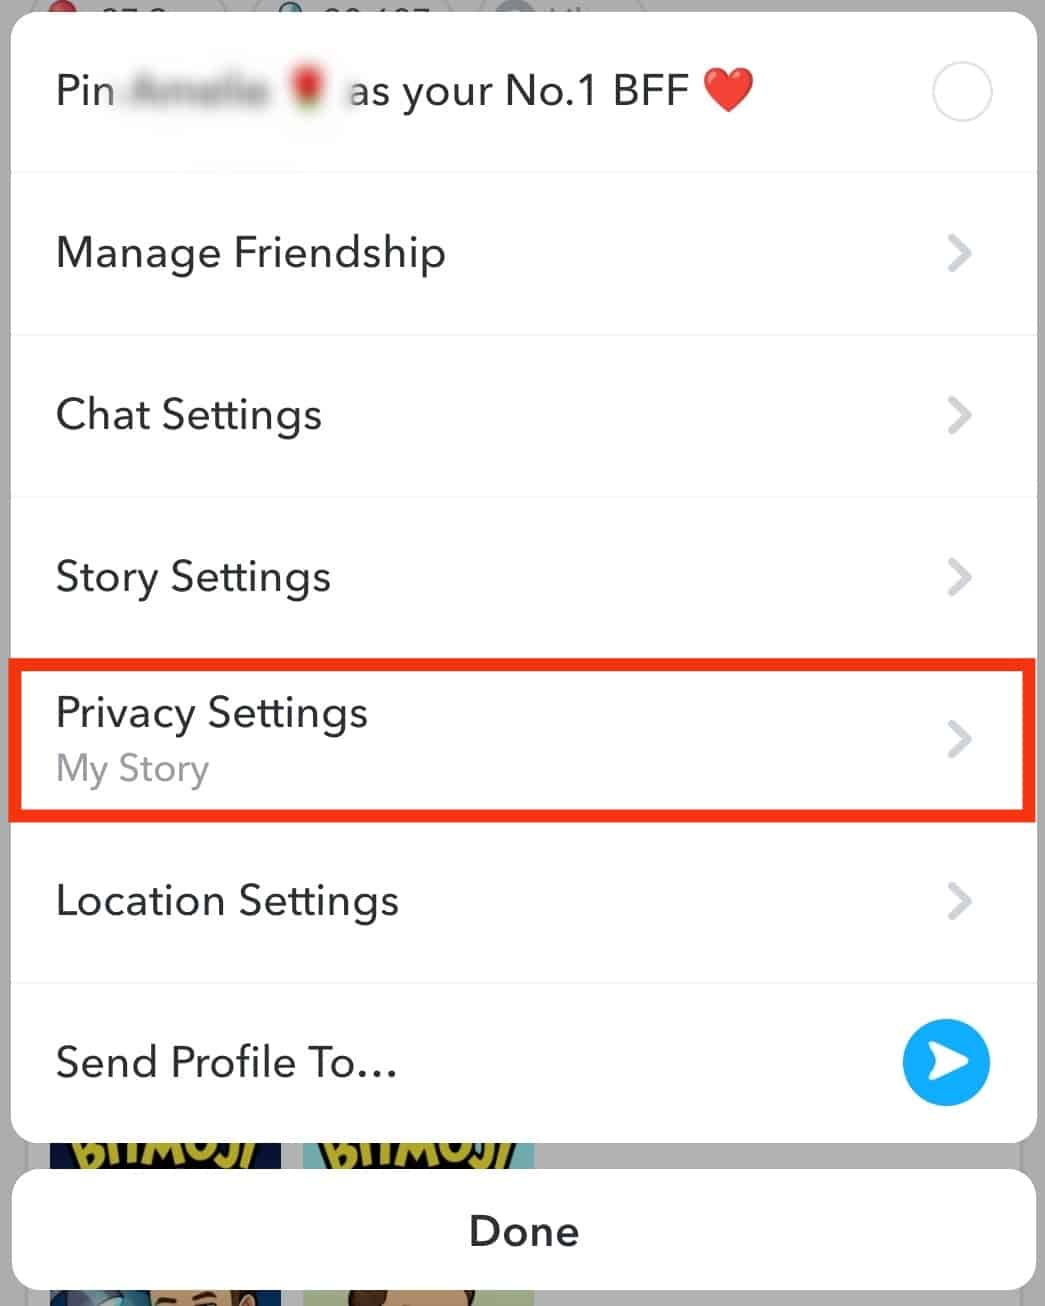 Select Privacy Settings